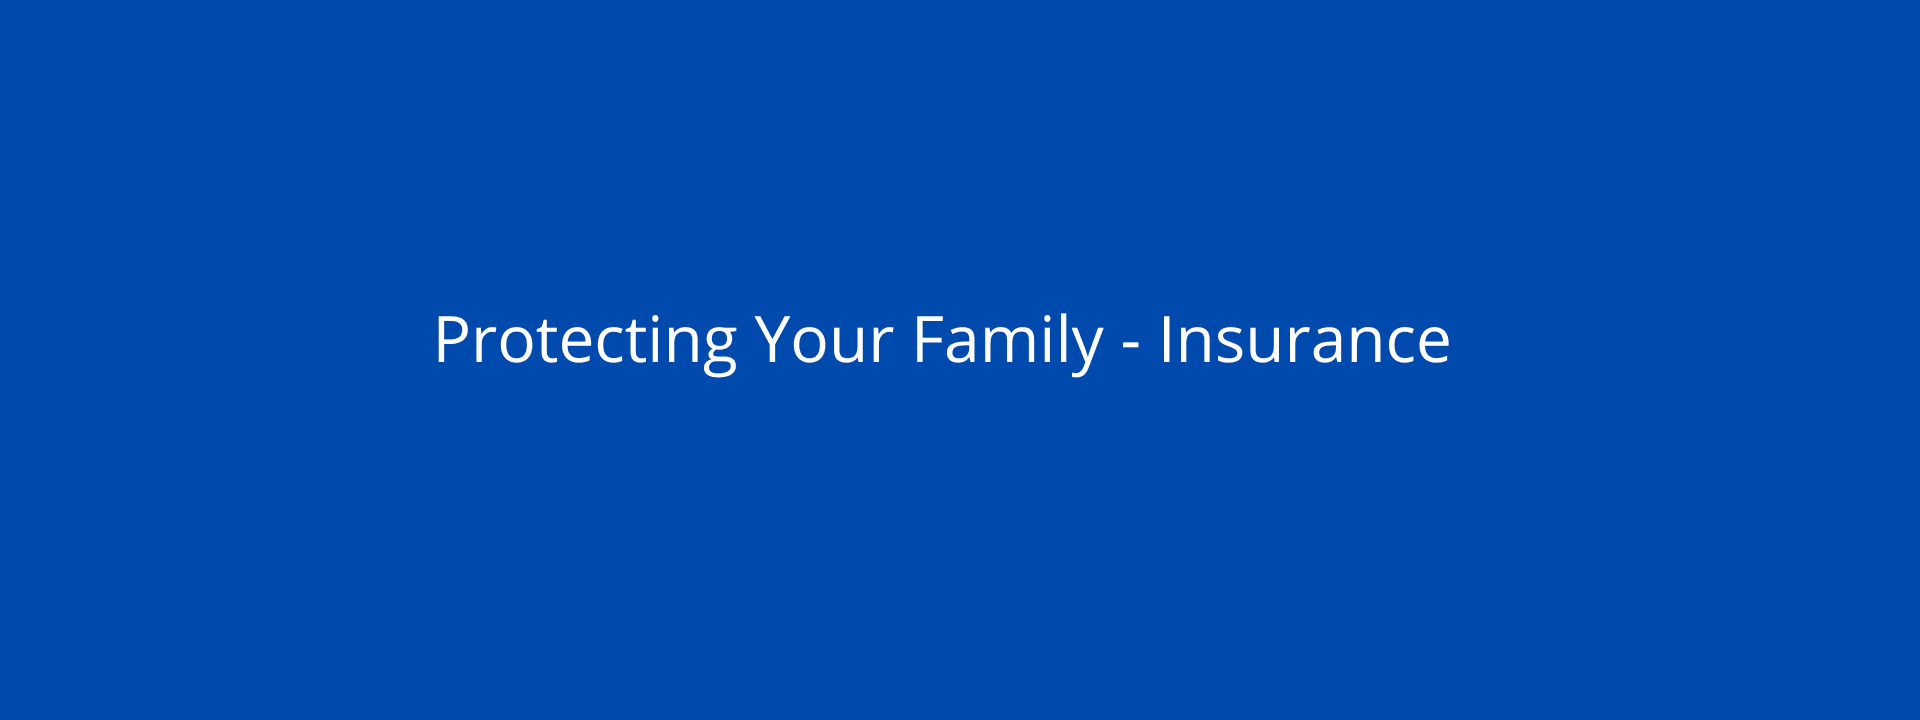 Protecting your family with Insurance